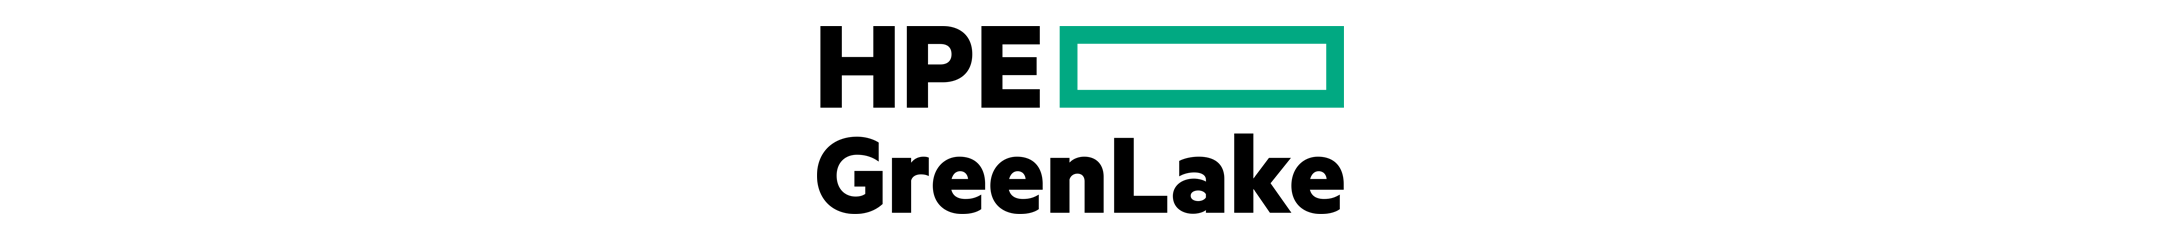 Hpe hub banner.png